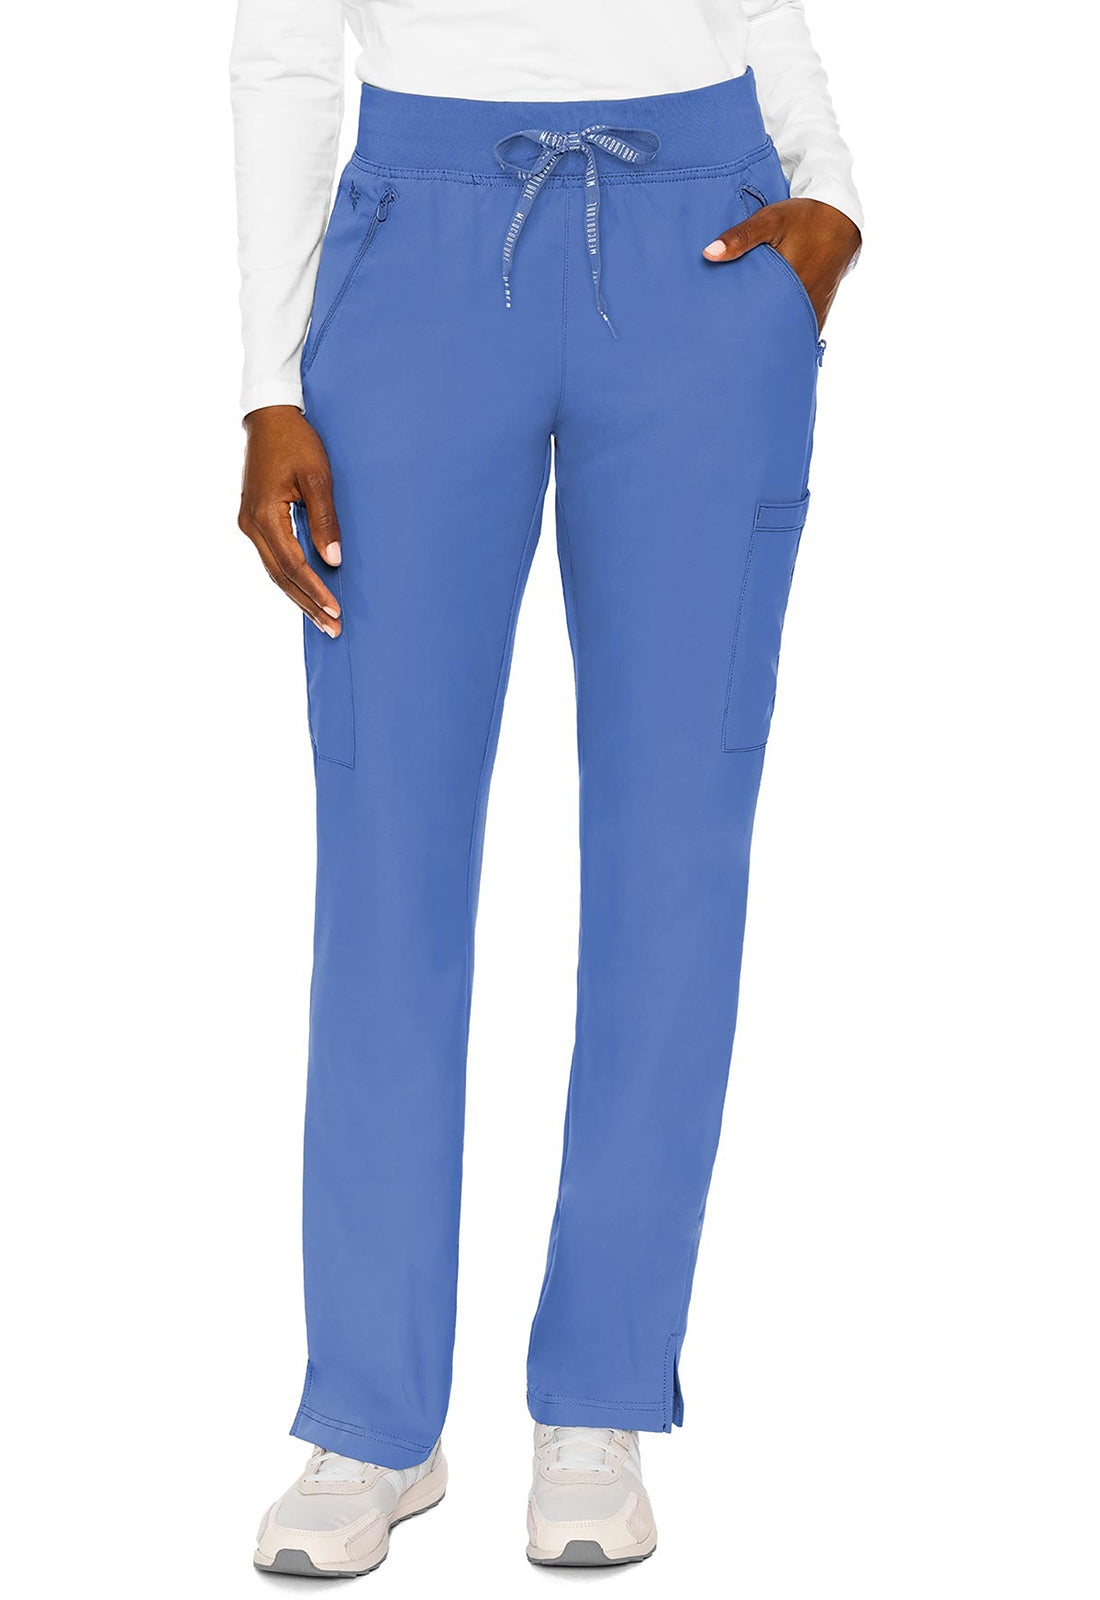 MC2702 - Med Couture Insight Straight Leg Pant